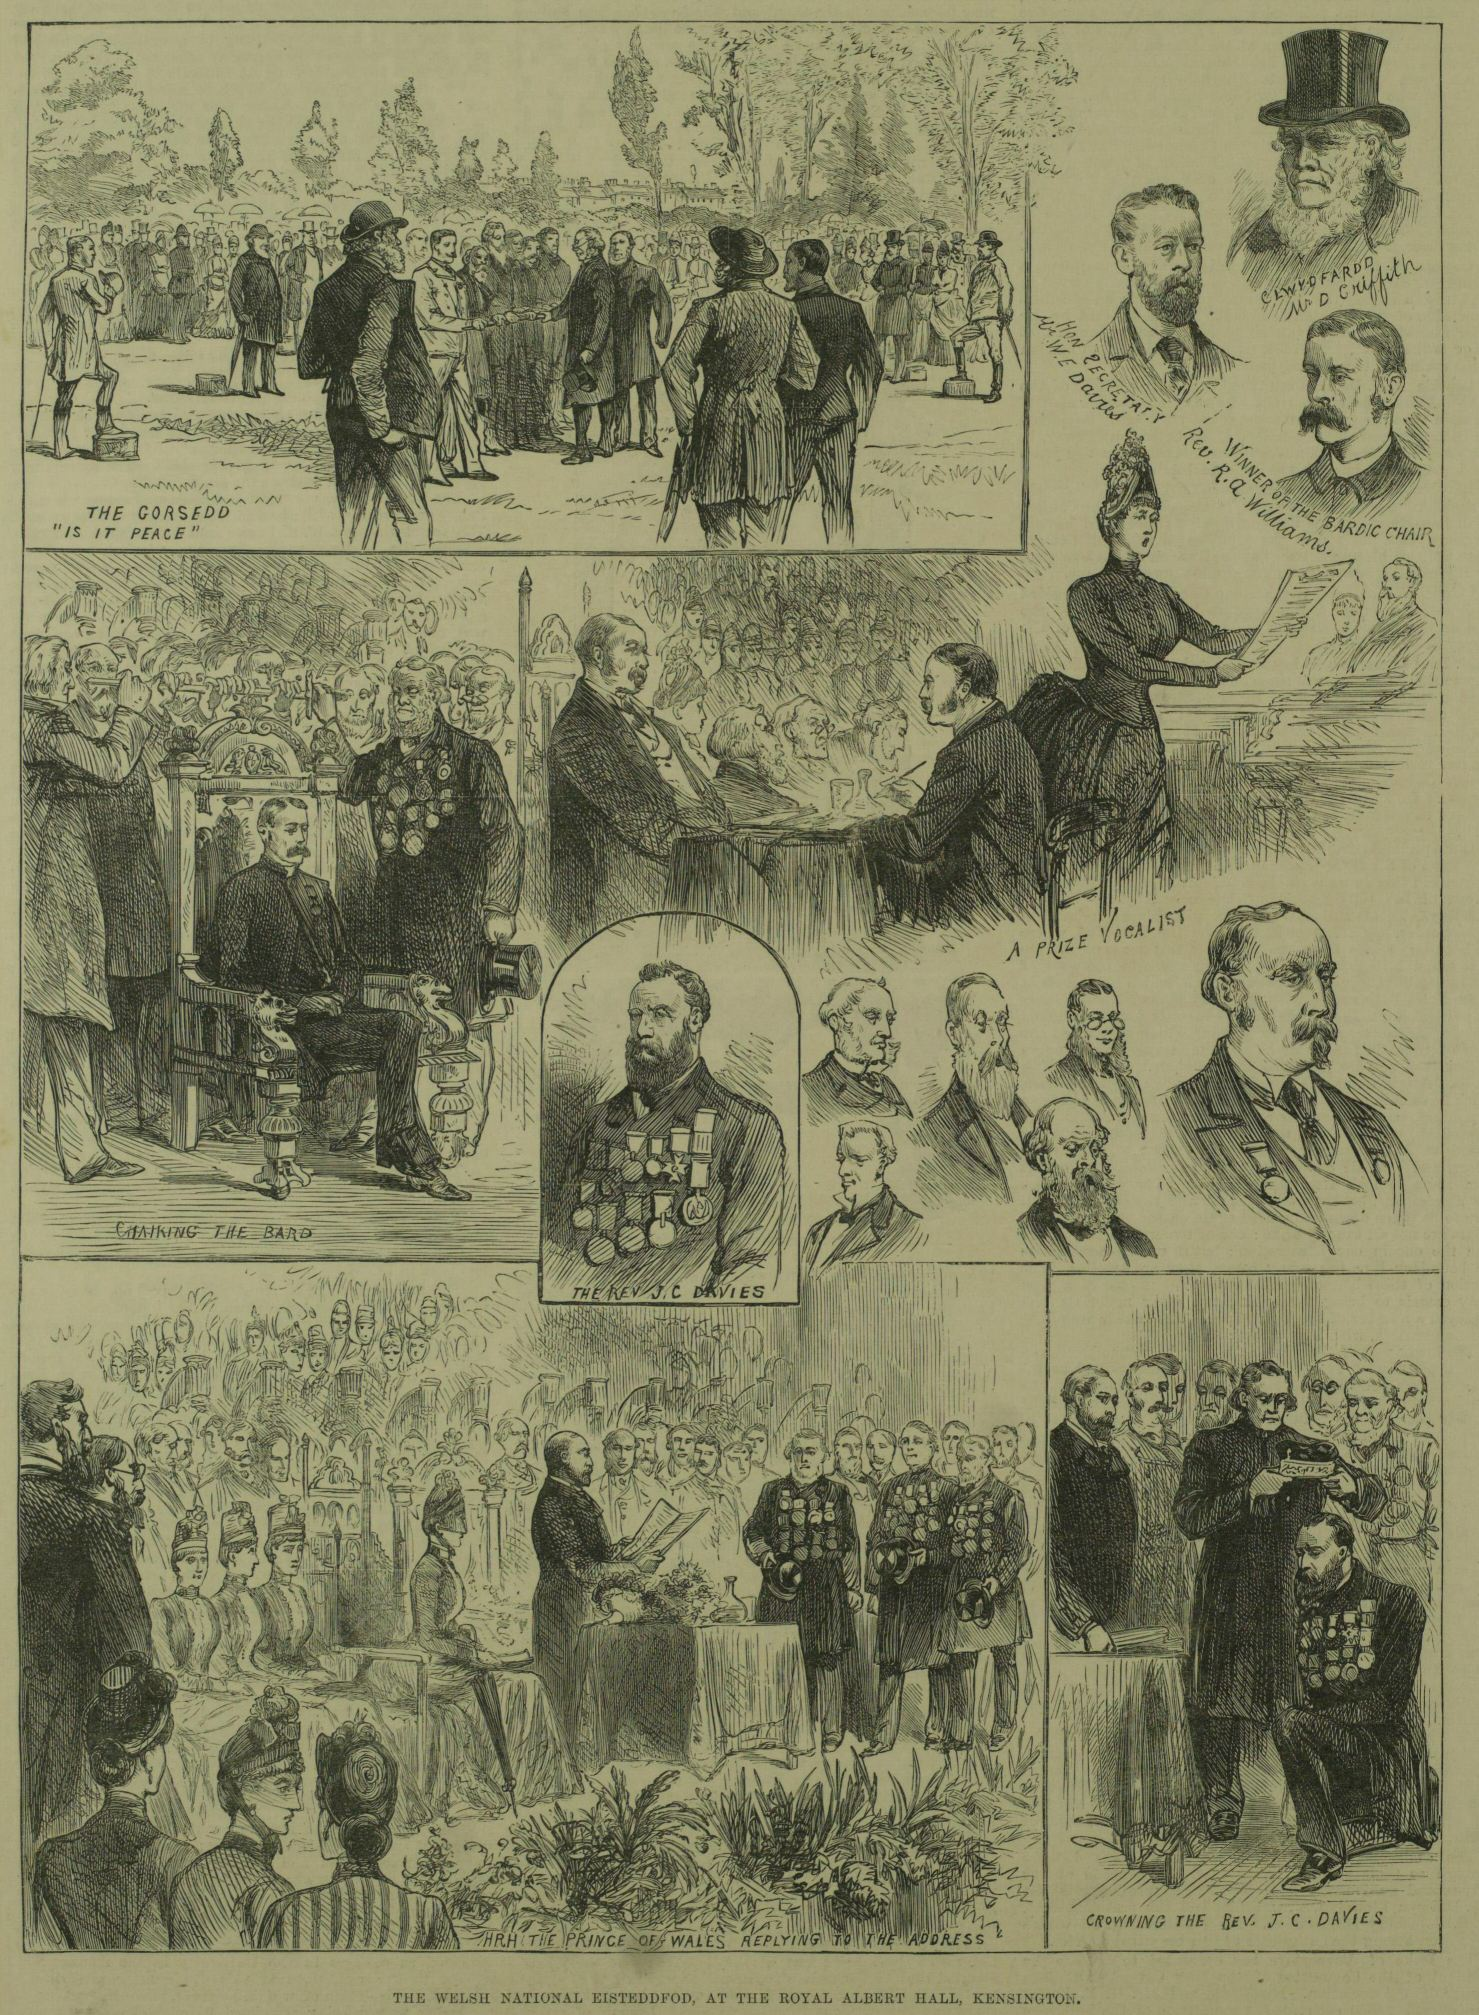 Illustration of the Prince of Wales attending the 1887 Welsh Eisteddfod at the Royal Albert Hall.